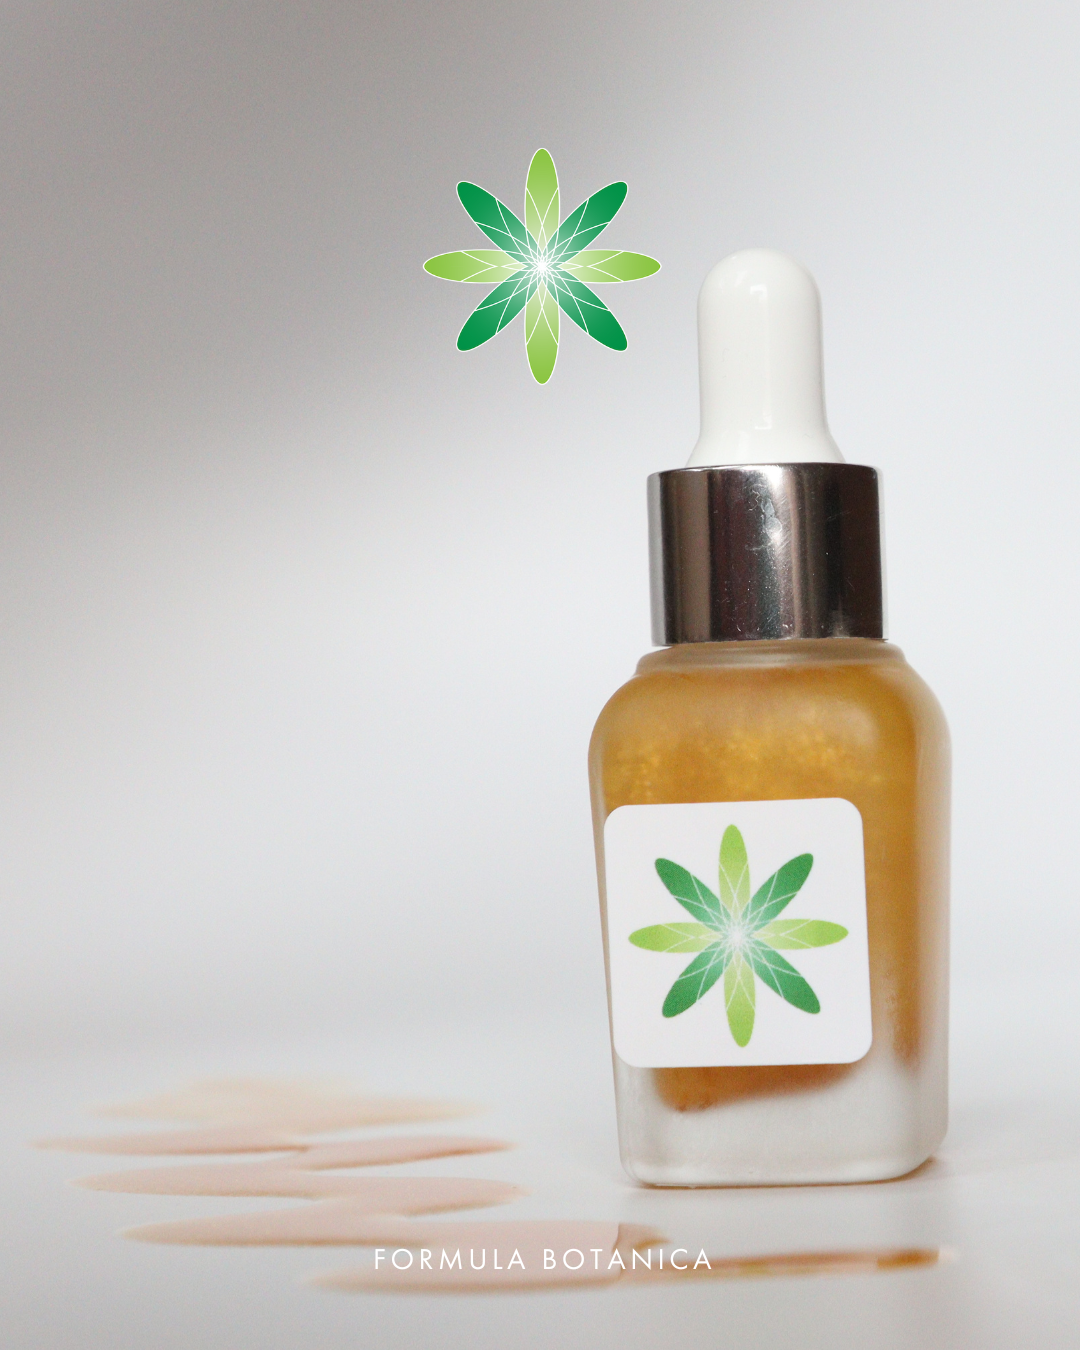 How to Make a Soothing Shimmering Body Oil formulation